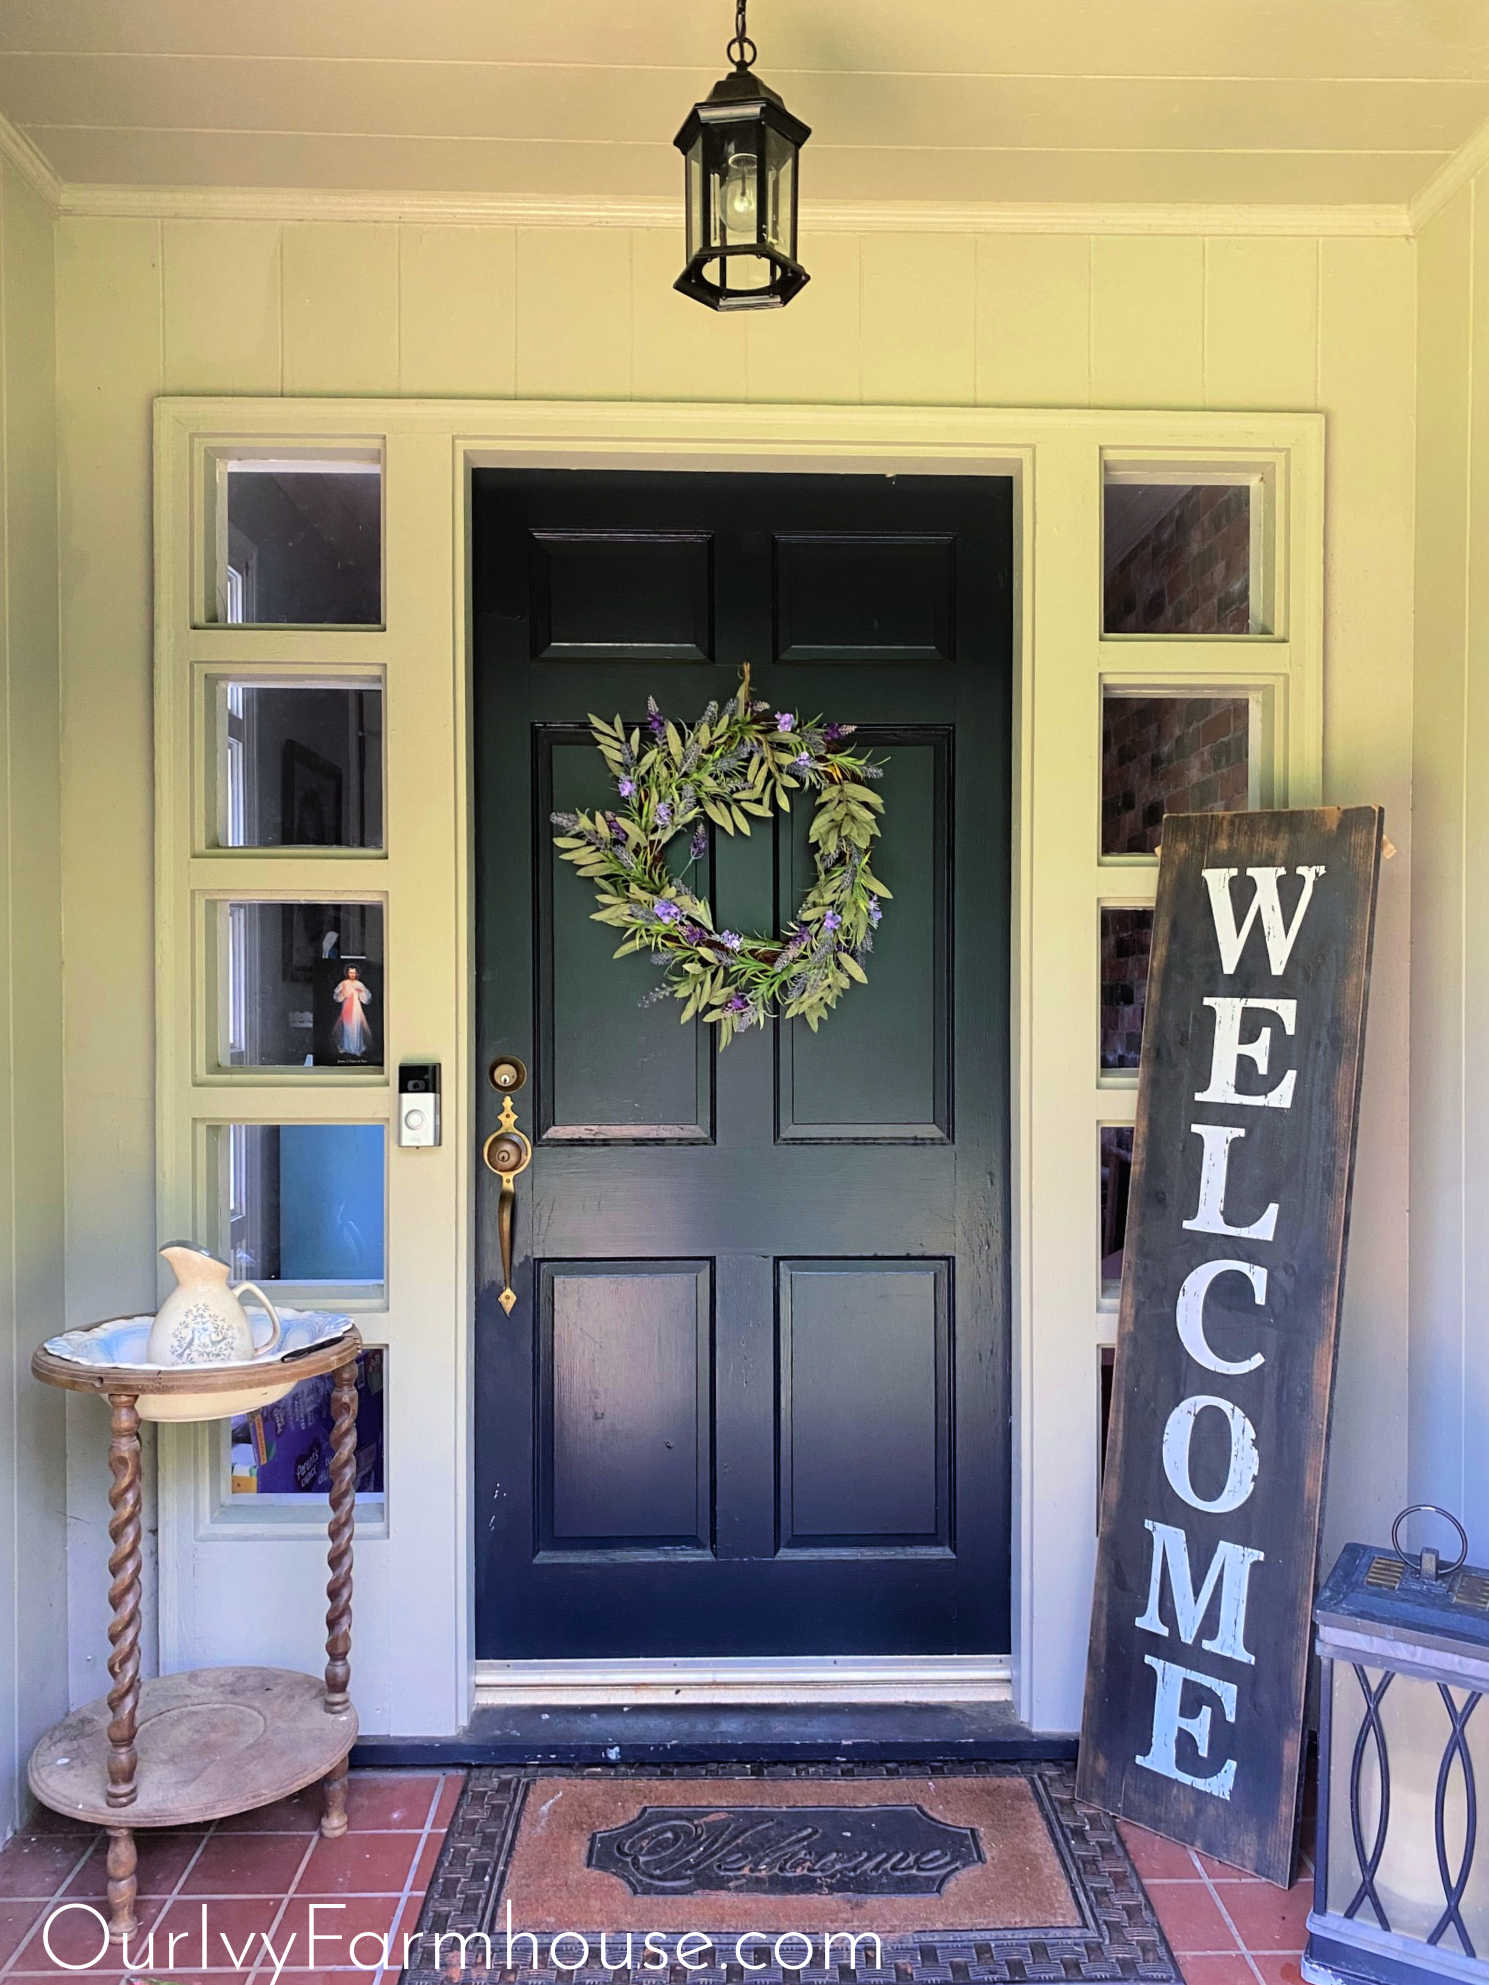 Small Front Porch Decorating Ideas on a Budget - Our Ivy Farmhouse